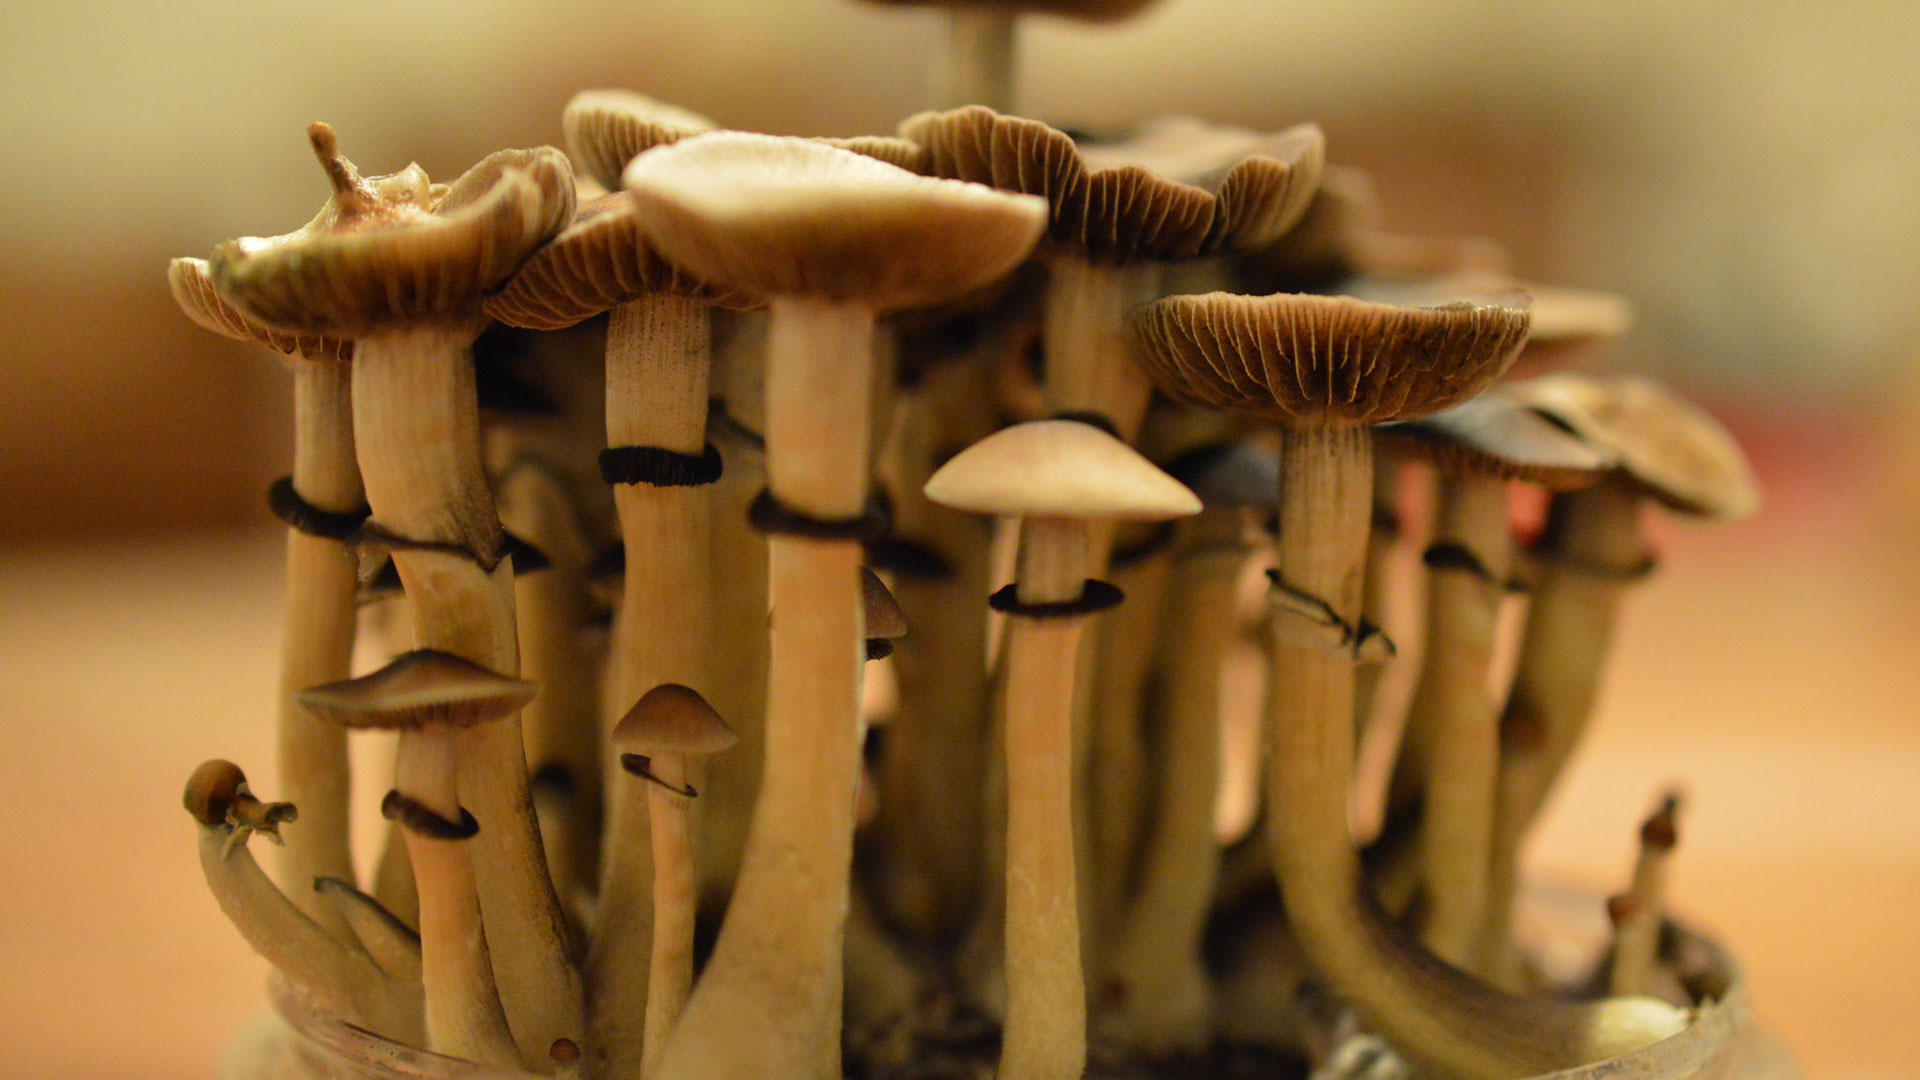 Psilocybin-containing mushrooms. Use of the psychoactive drug is growing in popularity in the U.S.